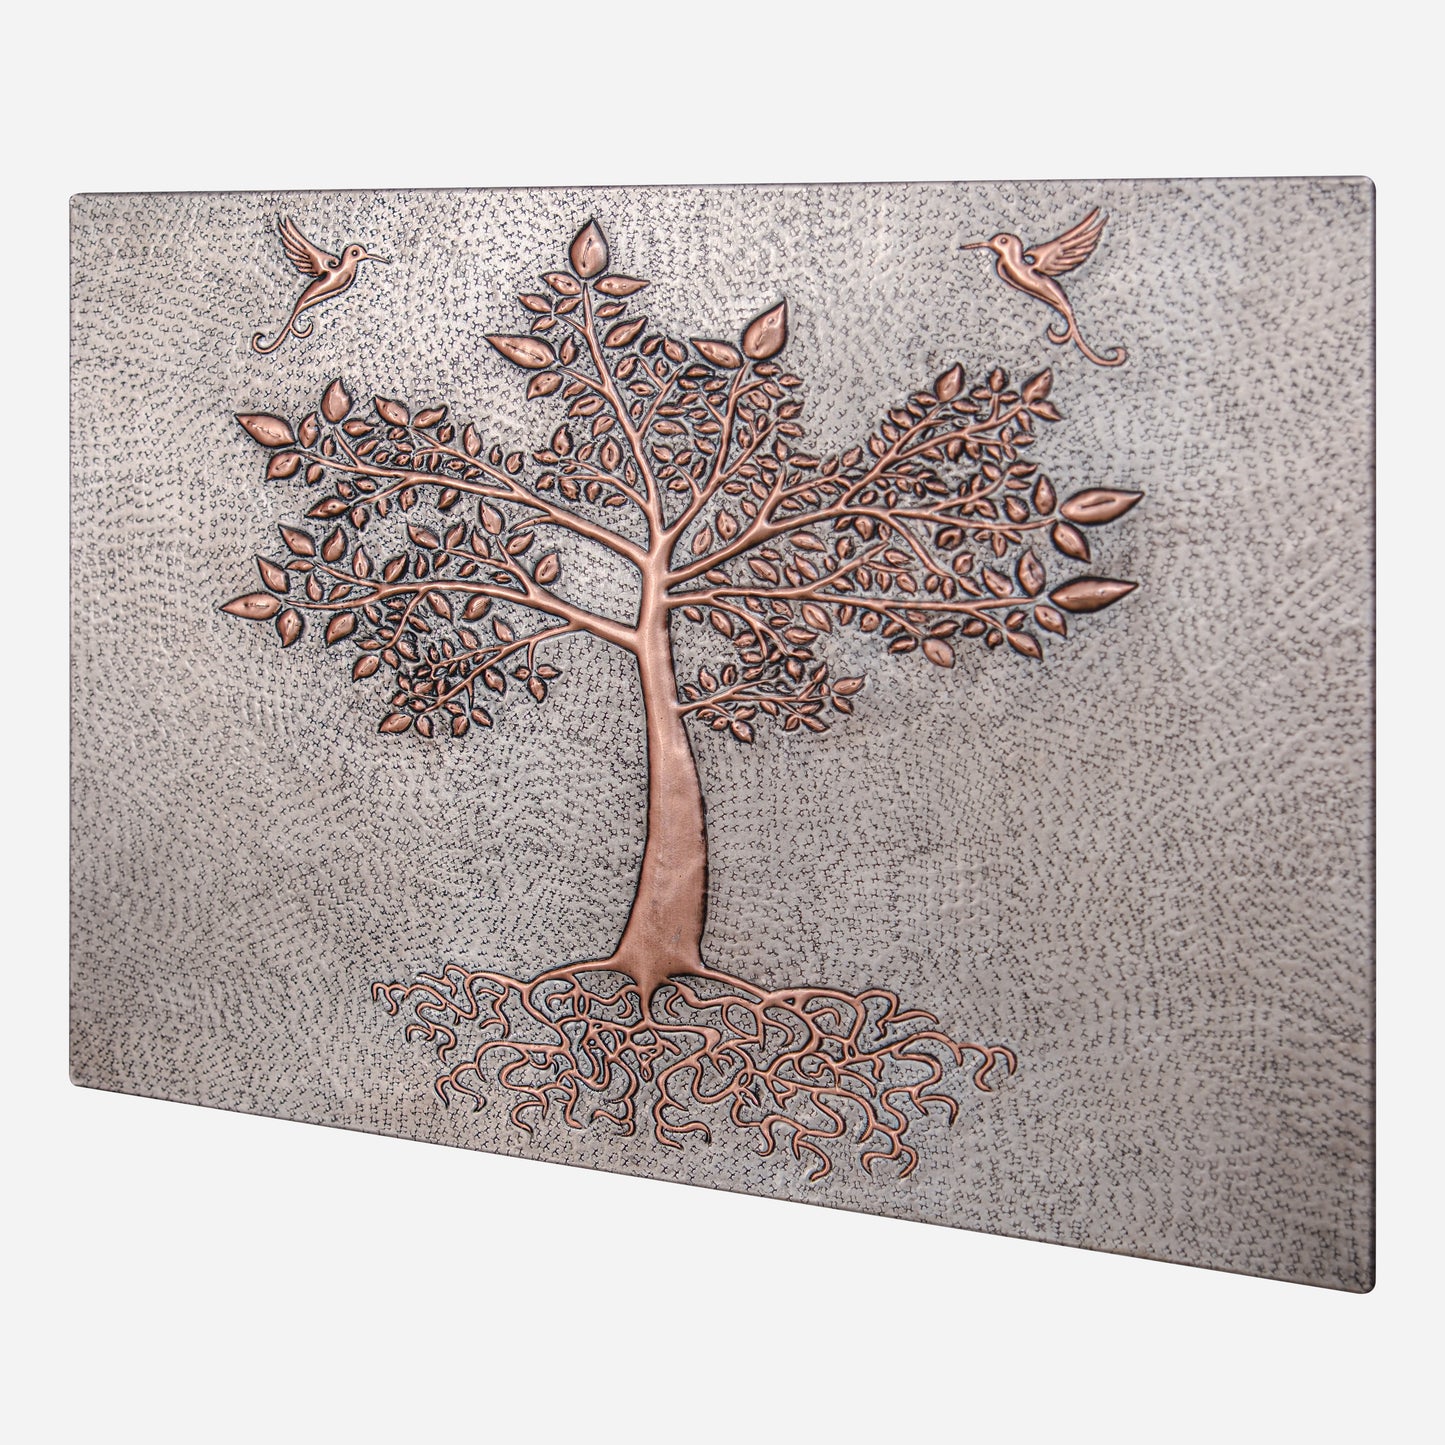 Copper Backsplash Panel (Tree with Roots, Hummingbirds, Silver&Copper Color)